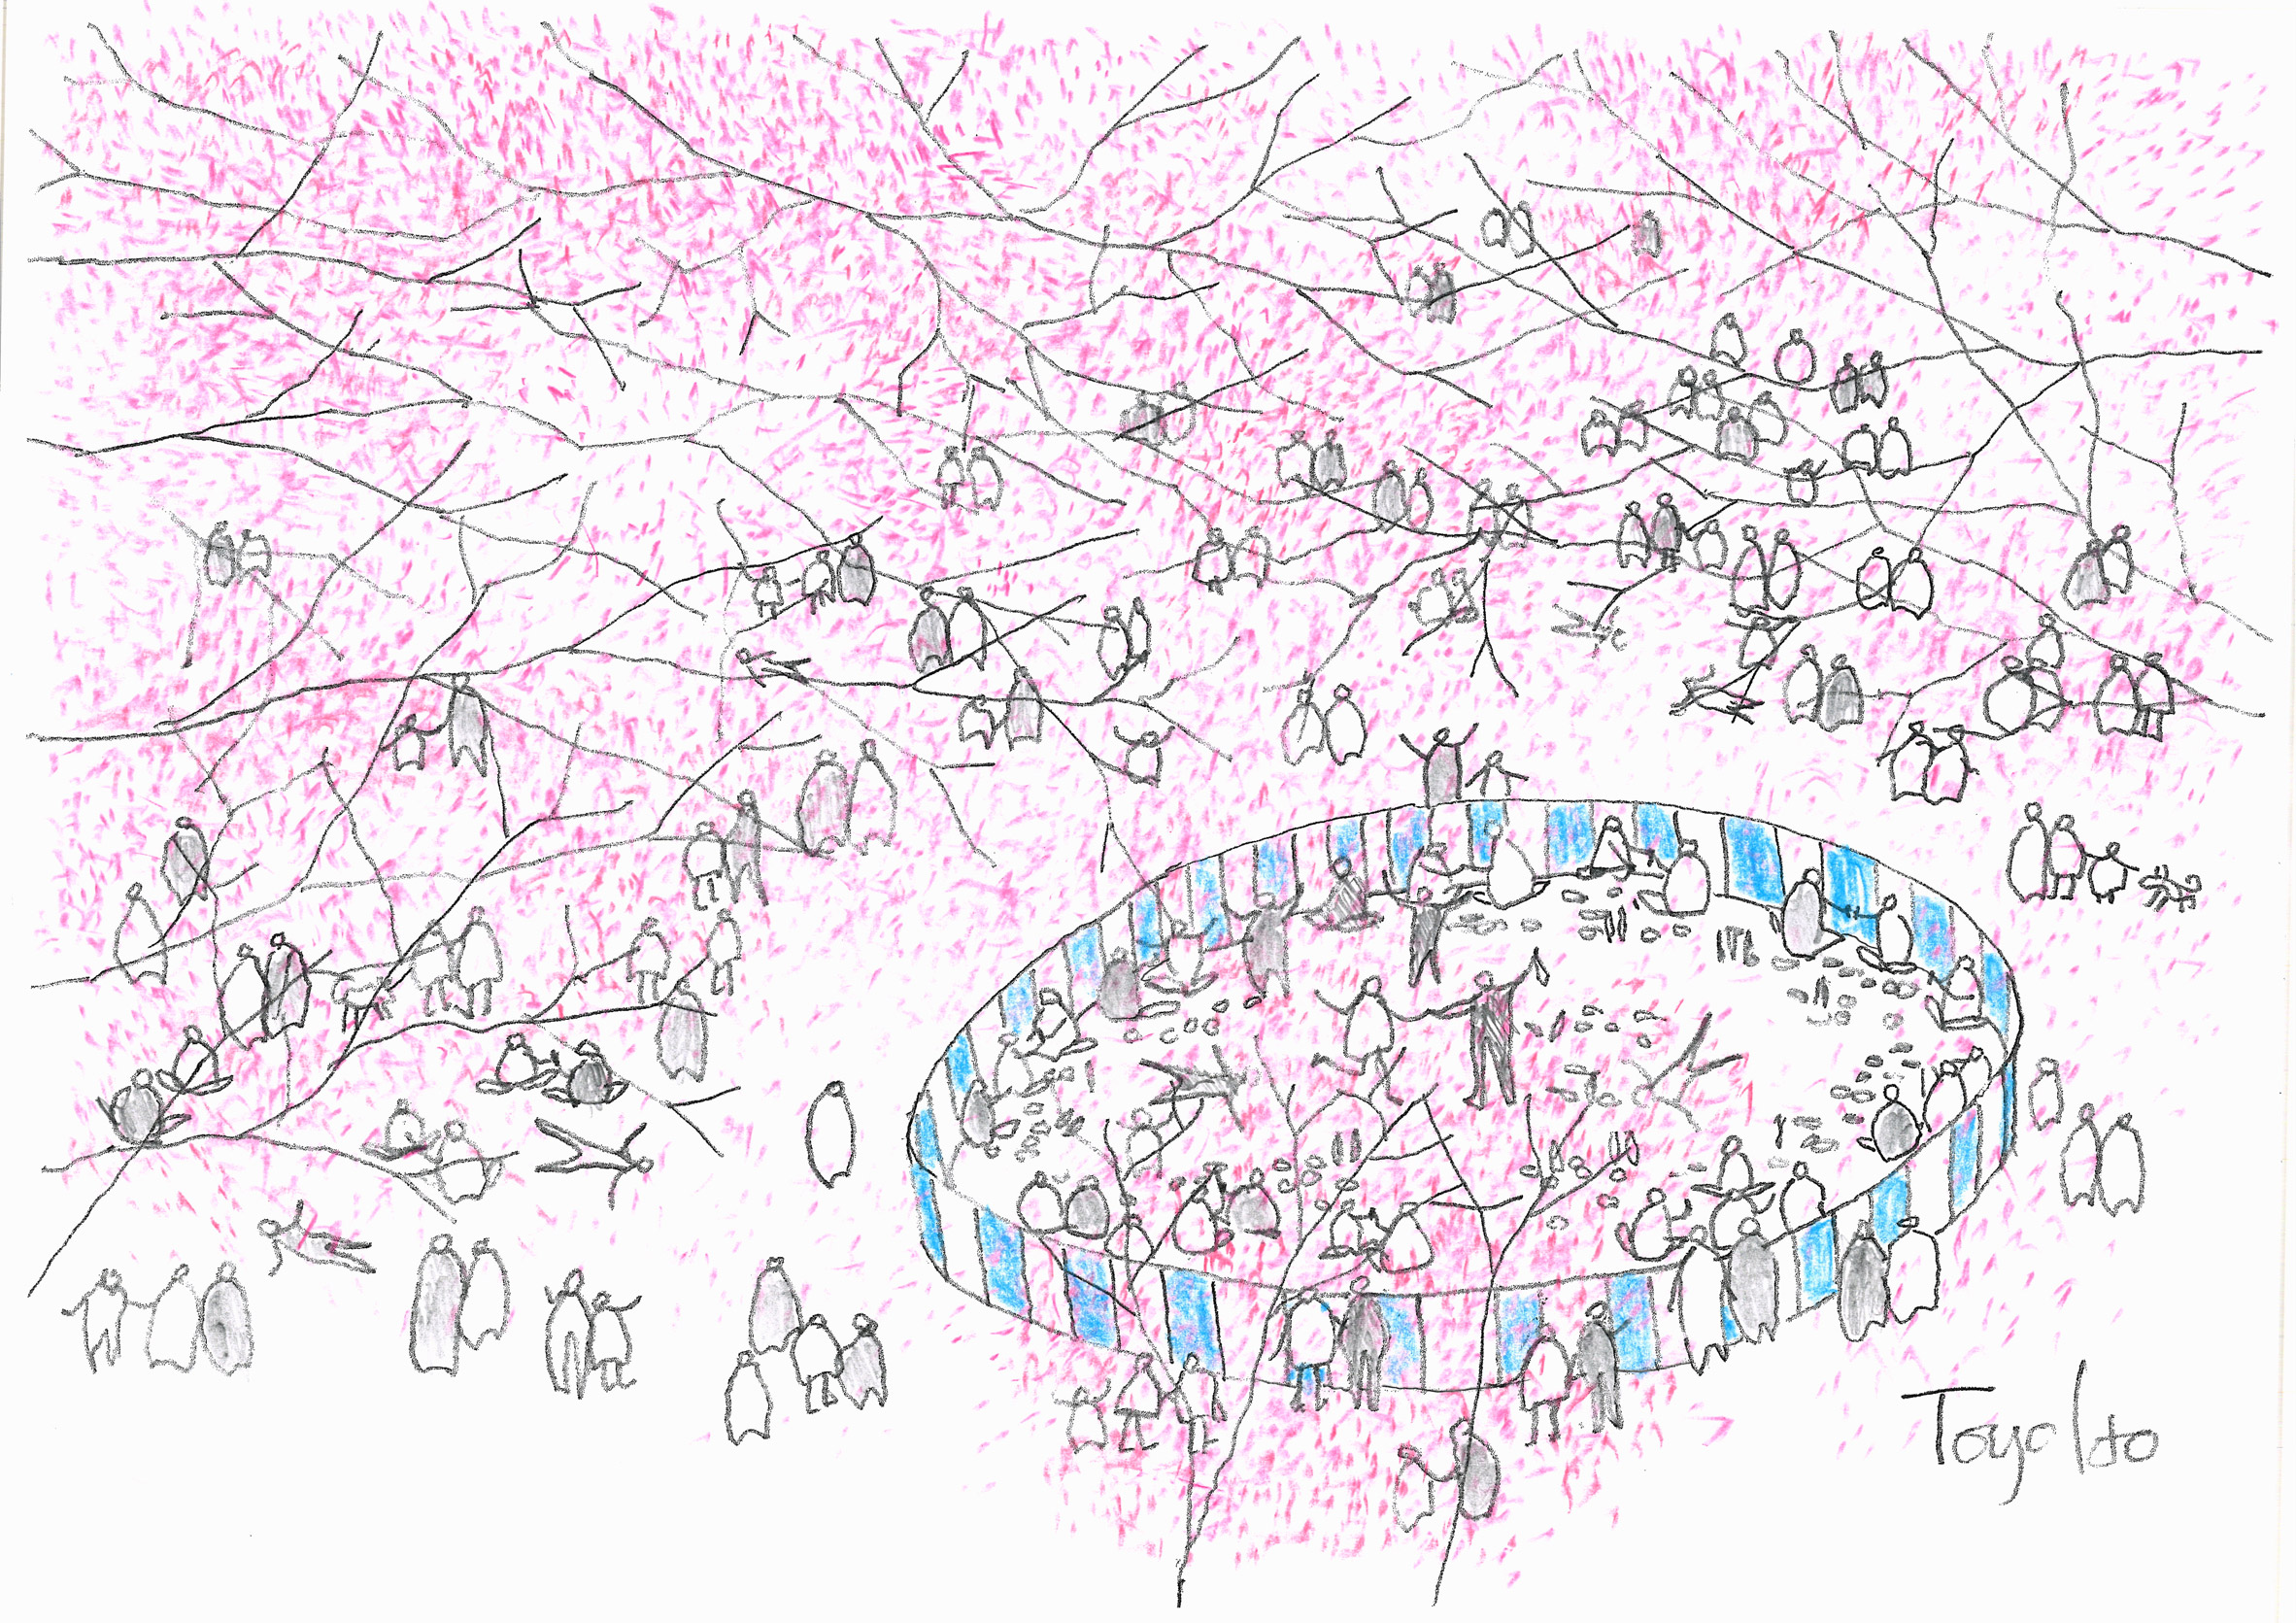 Toyo Ito's Under the Cherry Trees sketch for sale as part of the Architects for Beirut charity auction